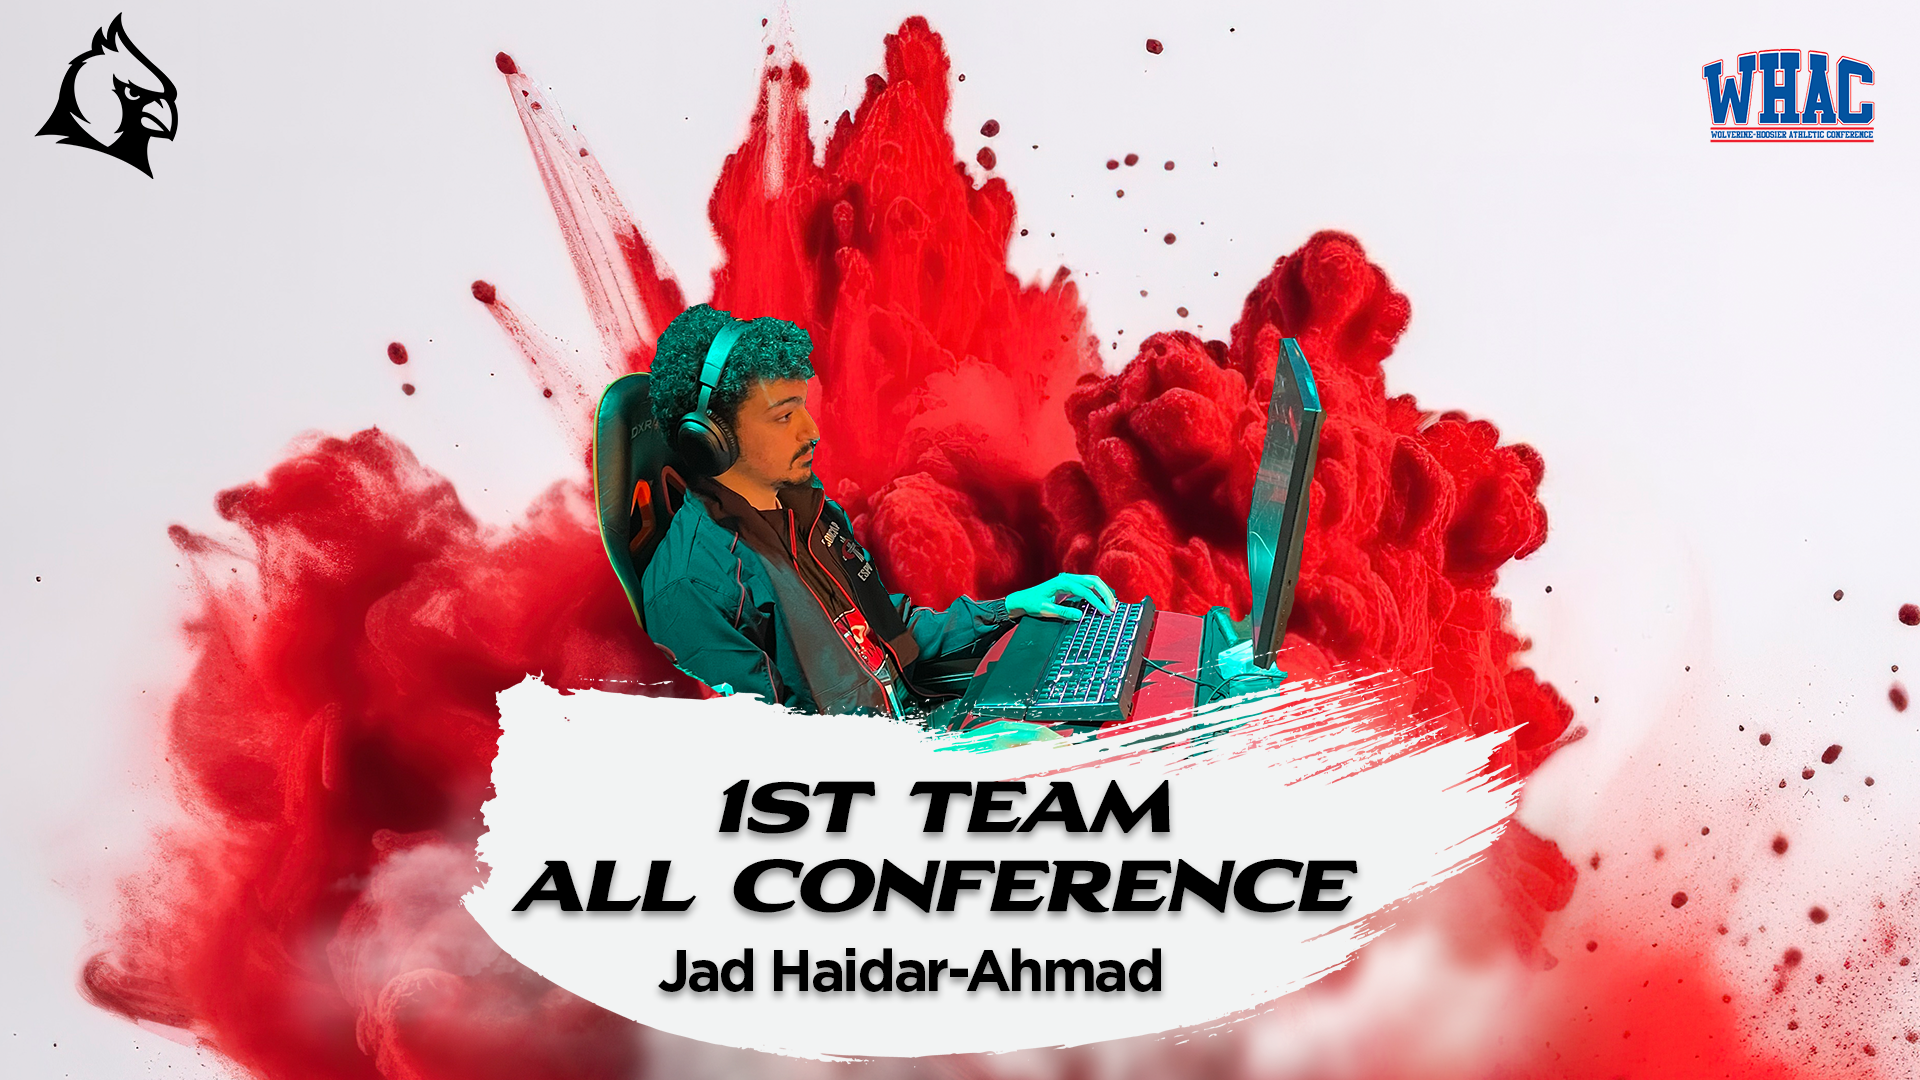 Jad Haidar-Ahmad named to All-WHAC First Team for League of Legends